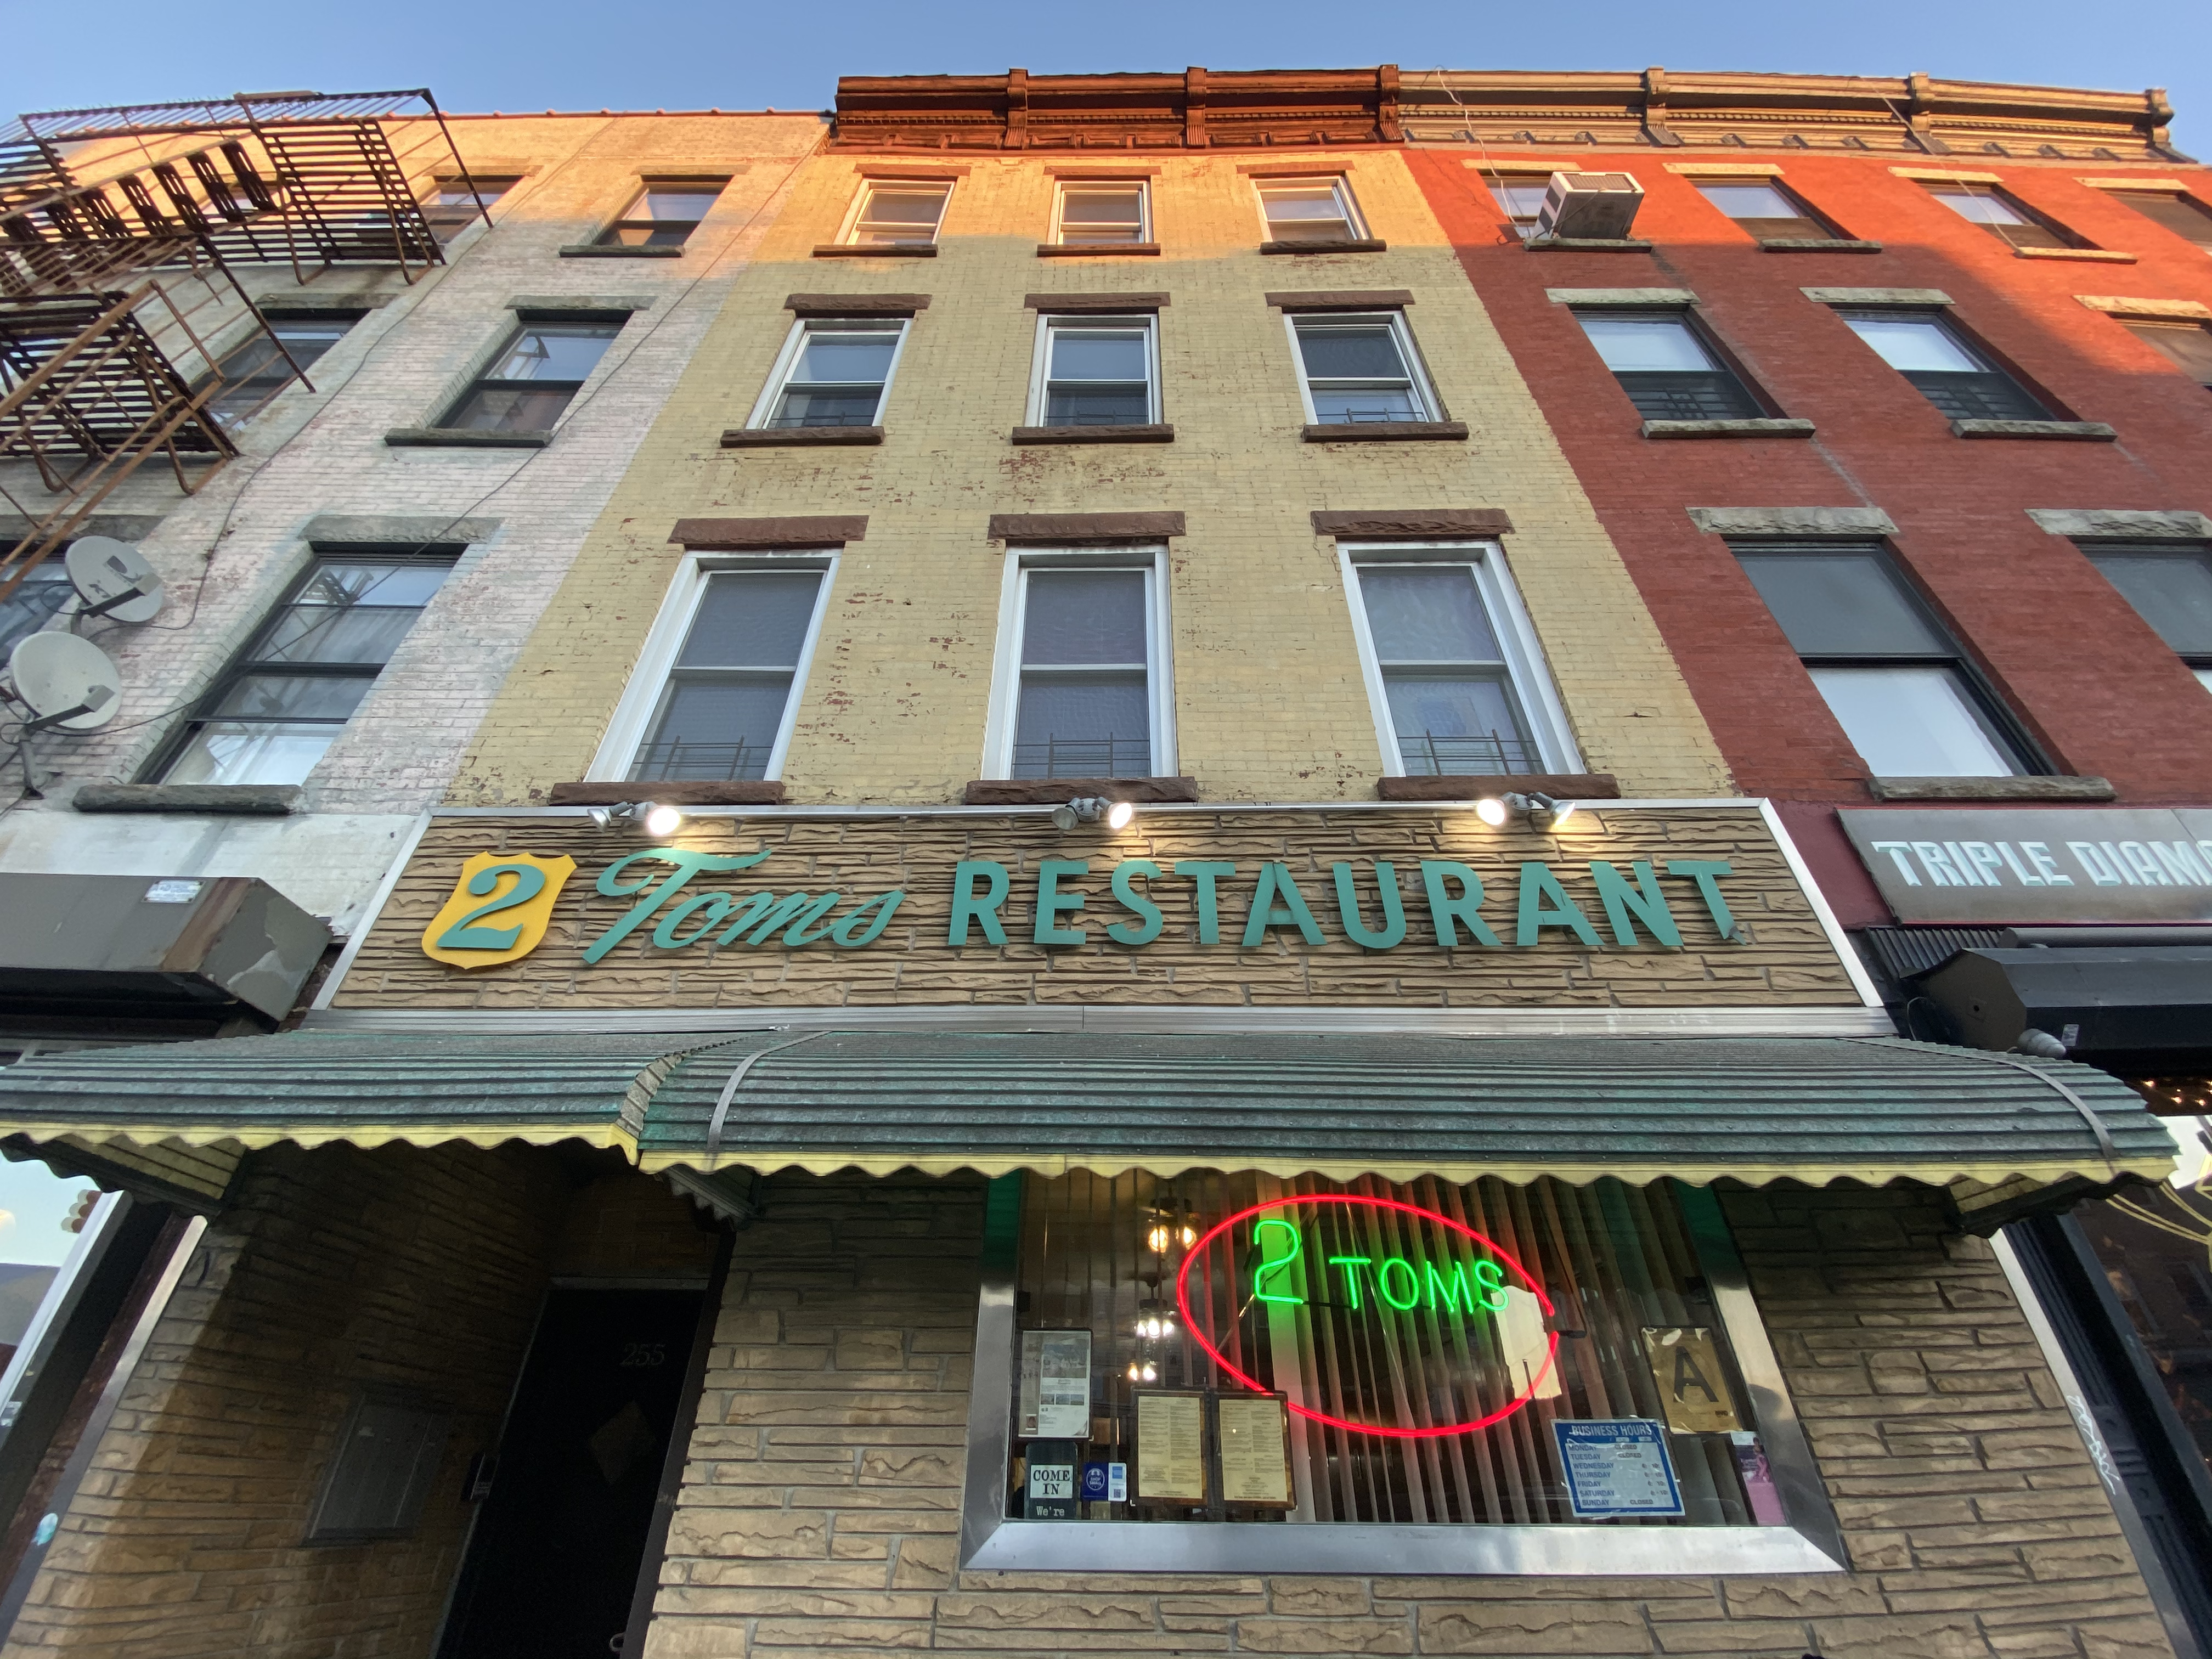 A neon sign shins near the entrance for Two Tom’s, while sea green lettering hangs above the window